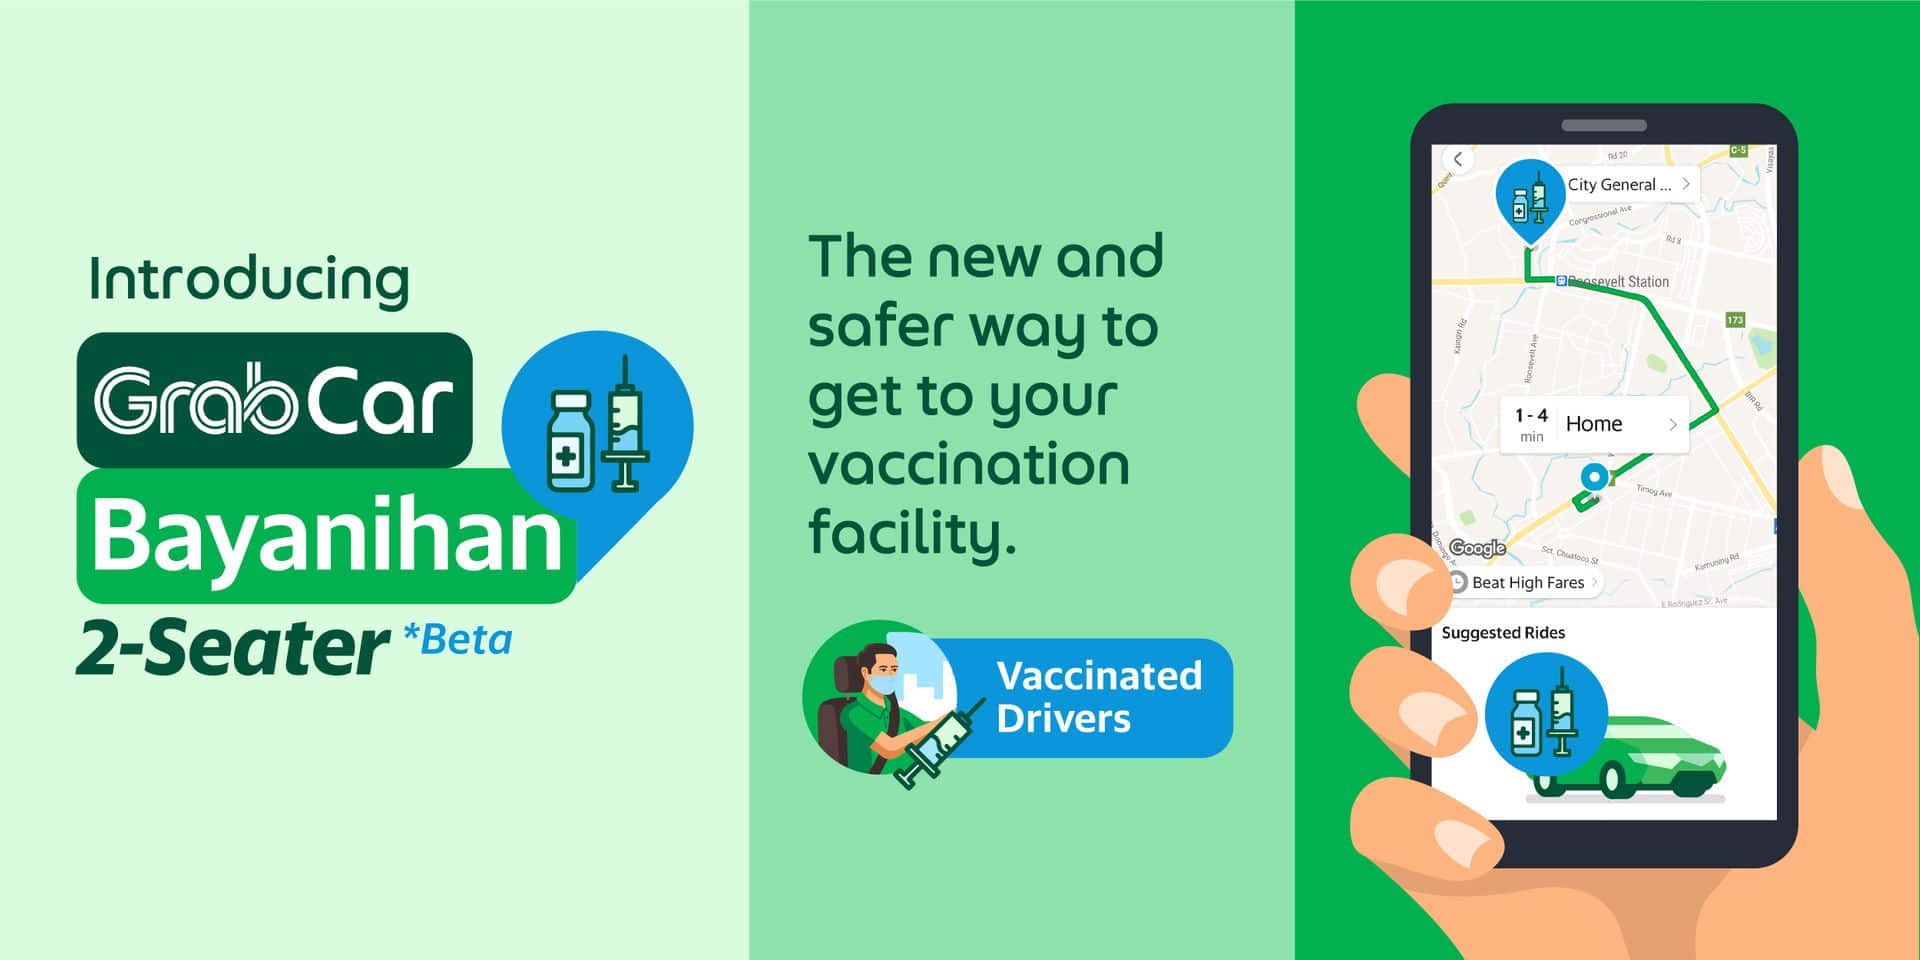 Grab launches cheaper rides to COVID-19 vaccination centers